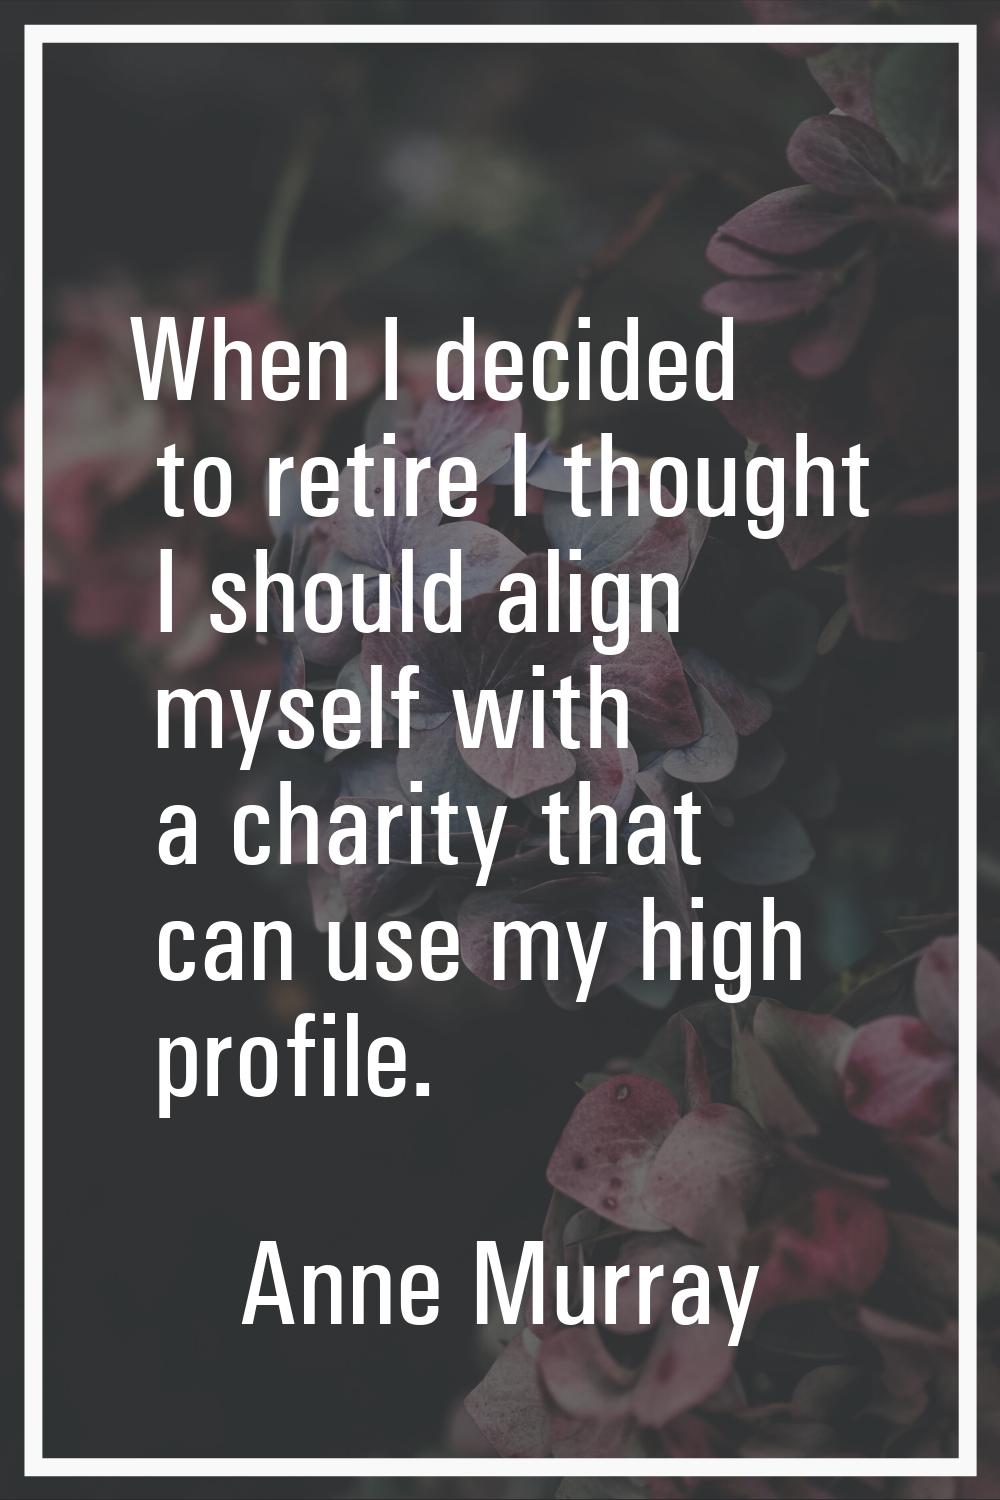 When I decided to retire I thought I should align myself with a charity that can use my high profil